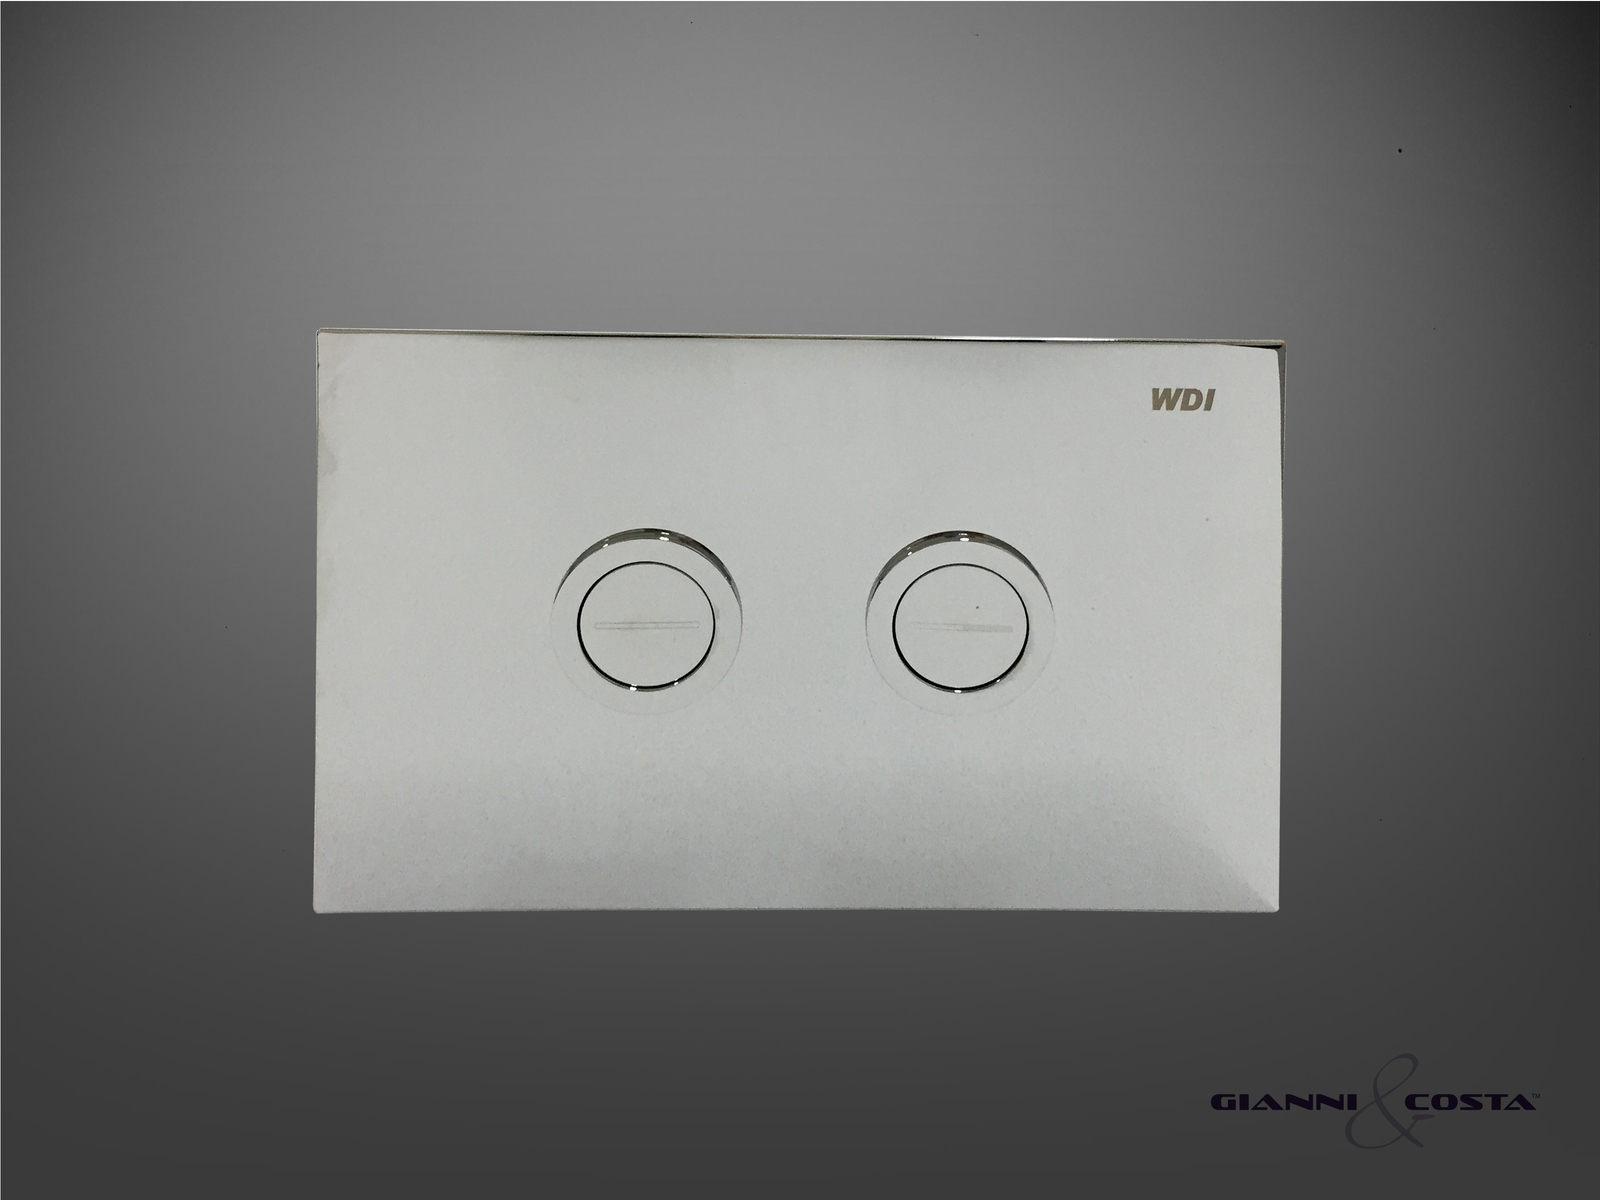 Ceramic Toilet Suite Concealed Cistern Floor Pan Model Riva GC89T, Brushed Round Buttons, Under Bench/Short, S-Trap 70mm